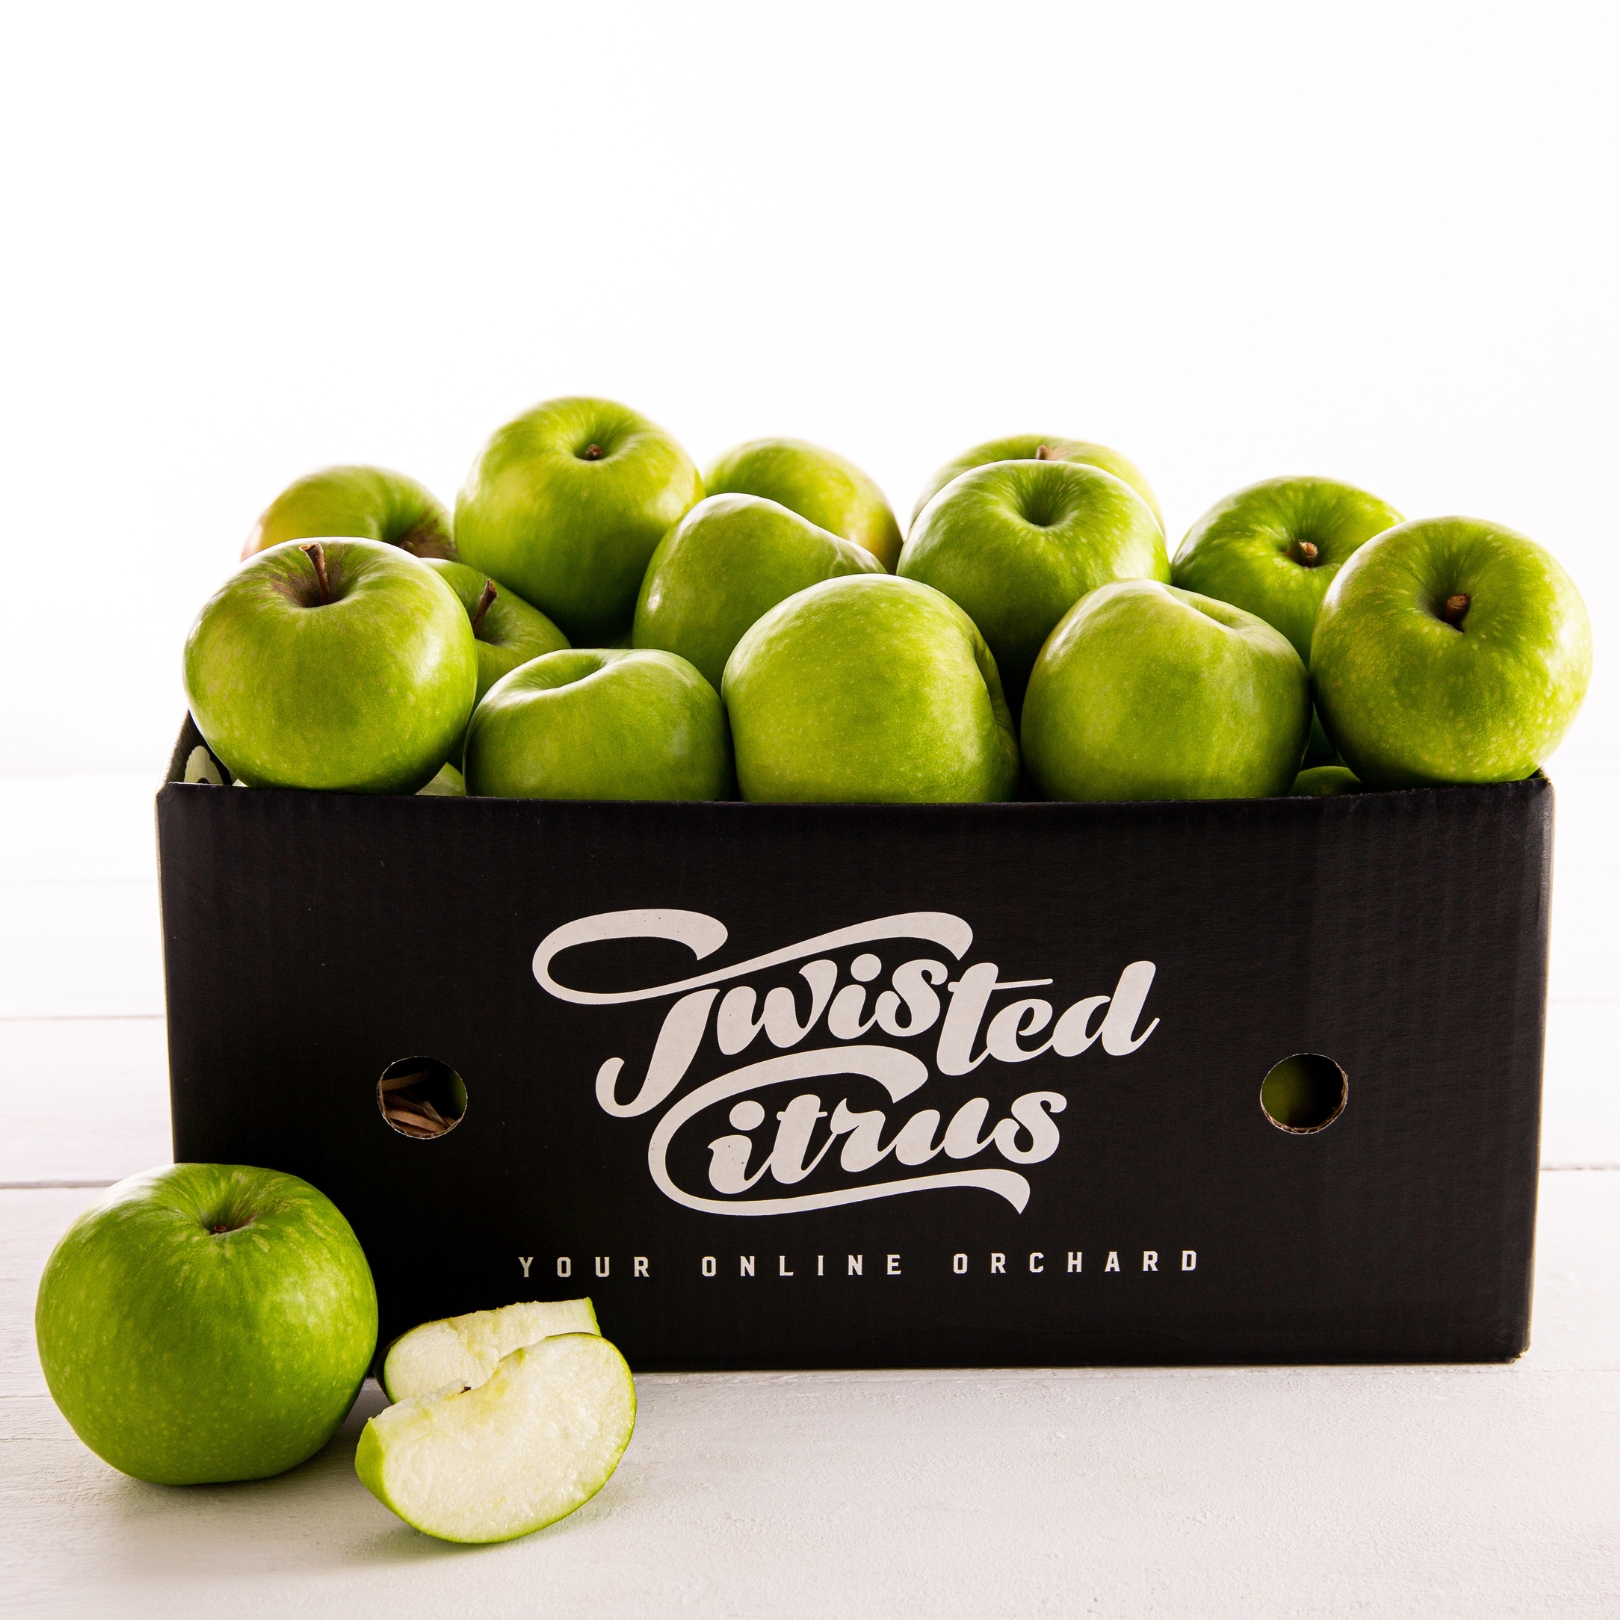 Apples - Granny Smith fruit box delivery nz